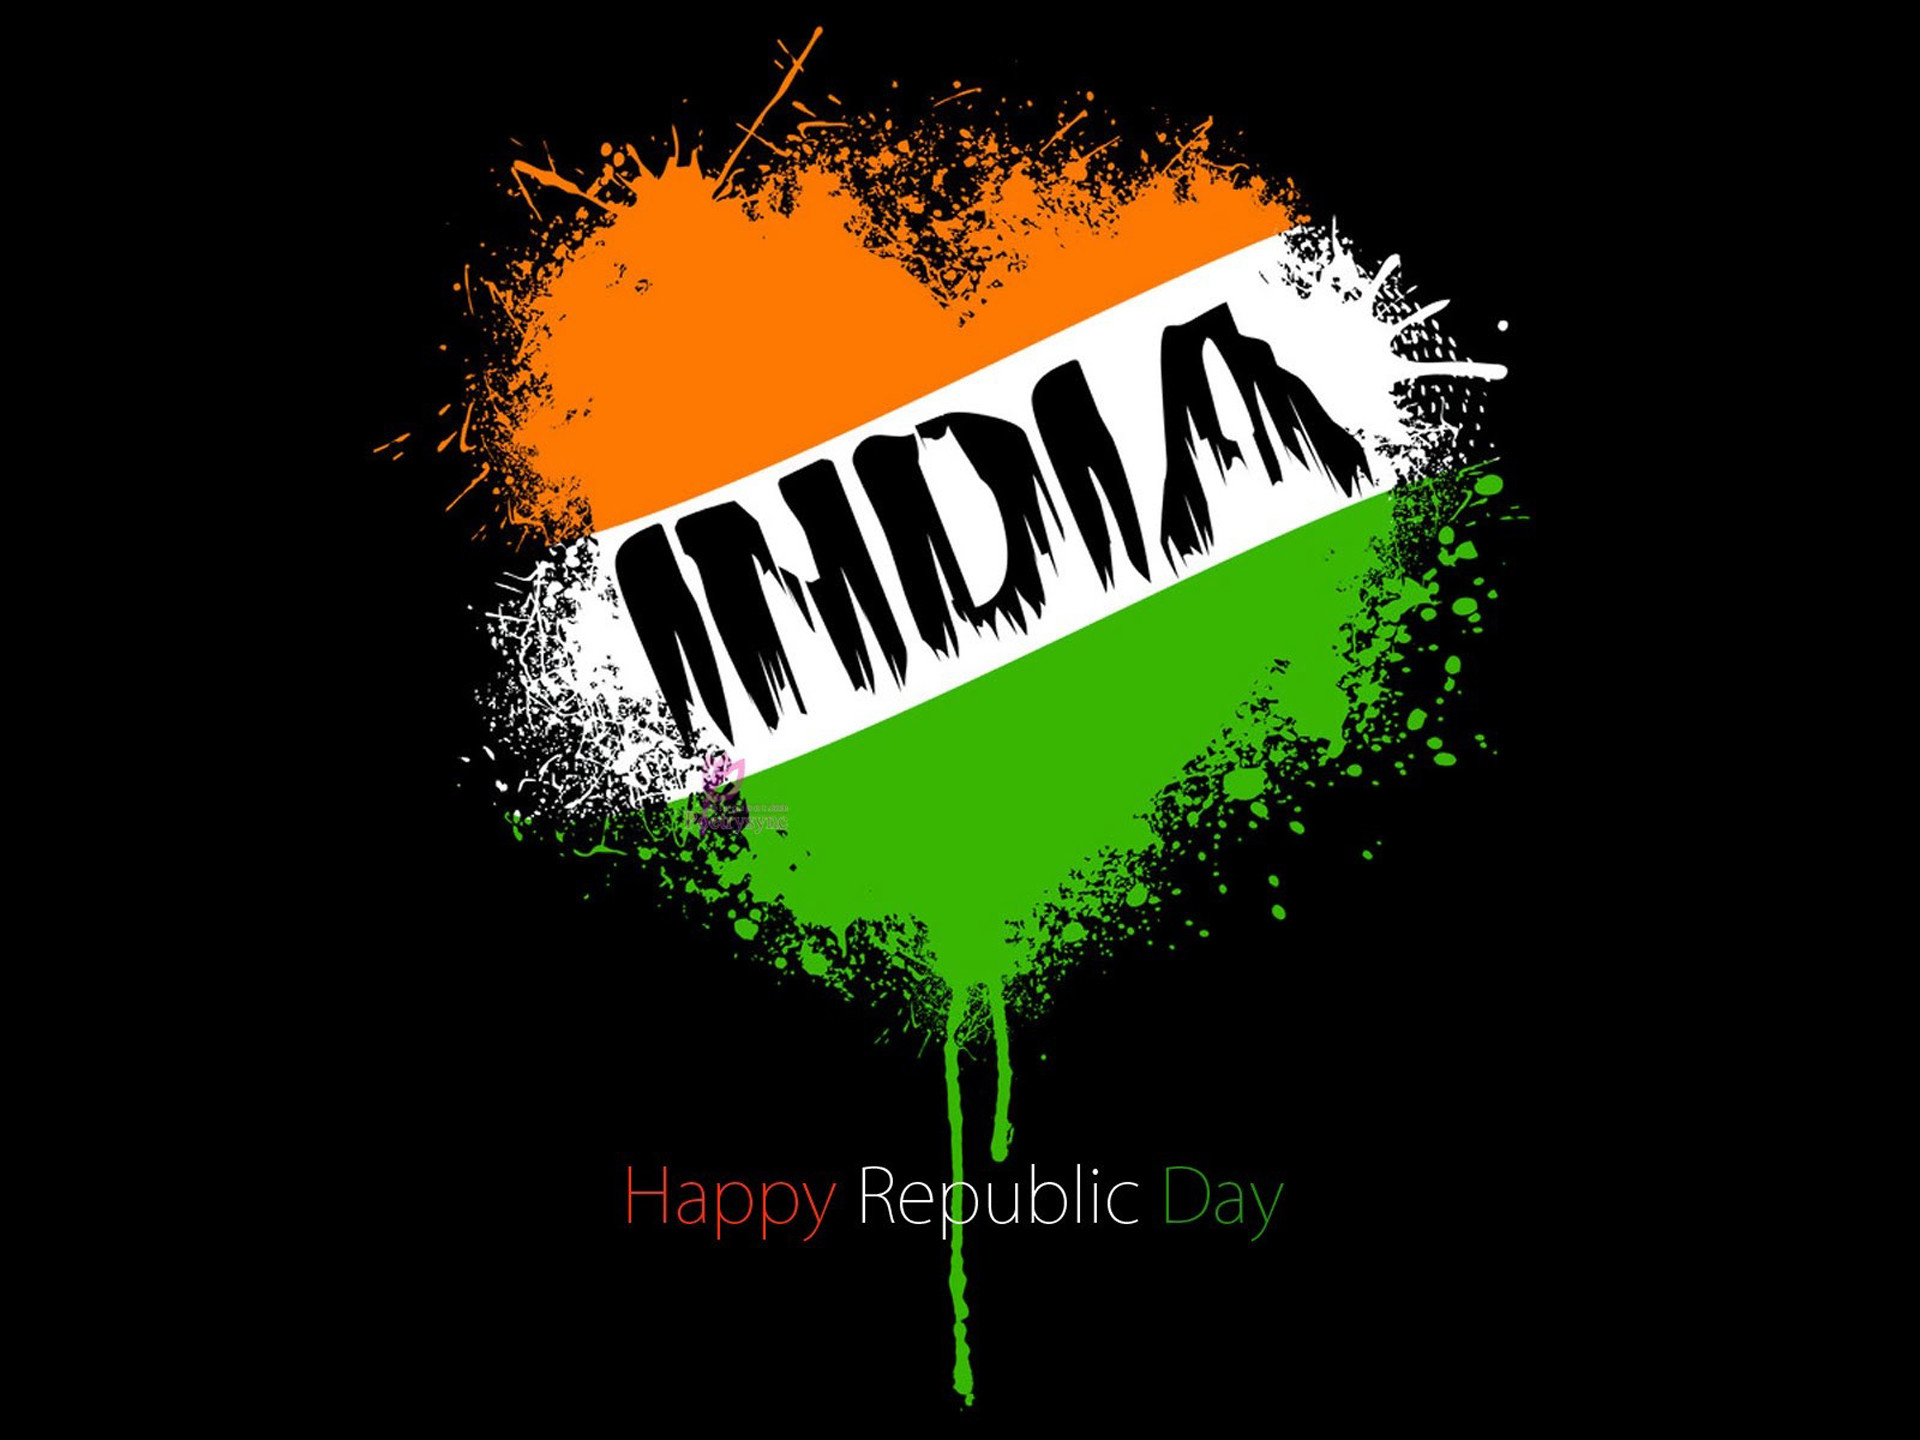 Republic Day 2015 Happy Republic Day 2015, Wishes,texts - Indian Republic Day 2018 - HD Wallpaper 